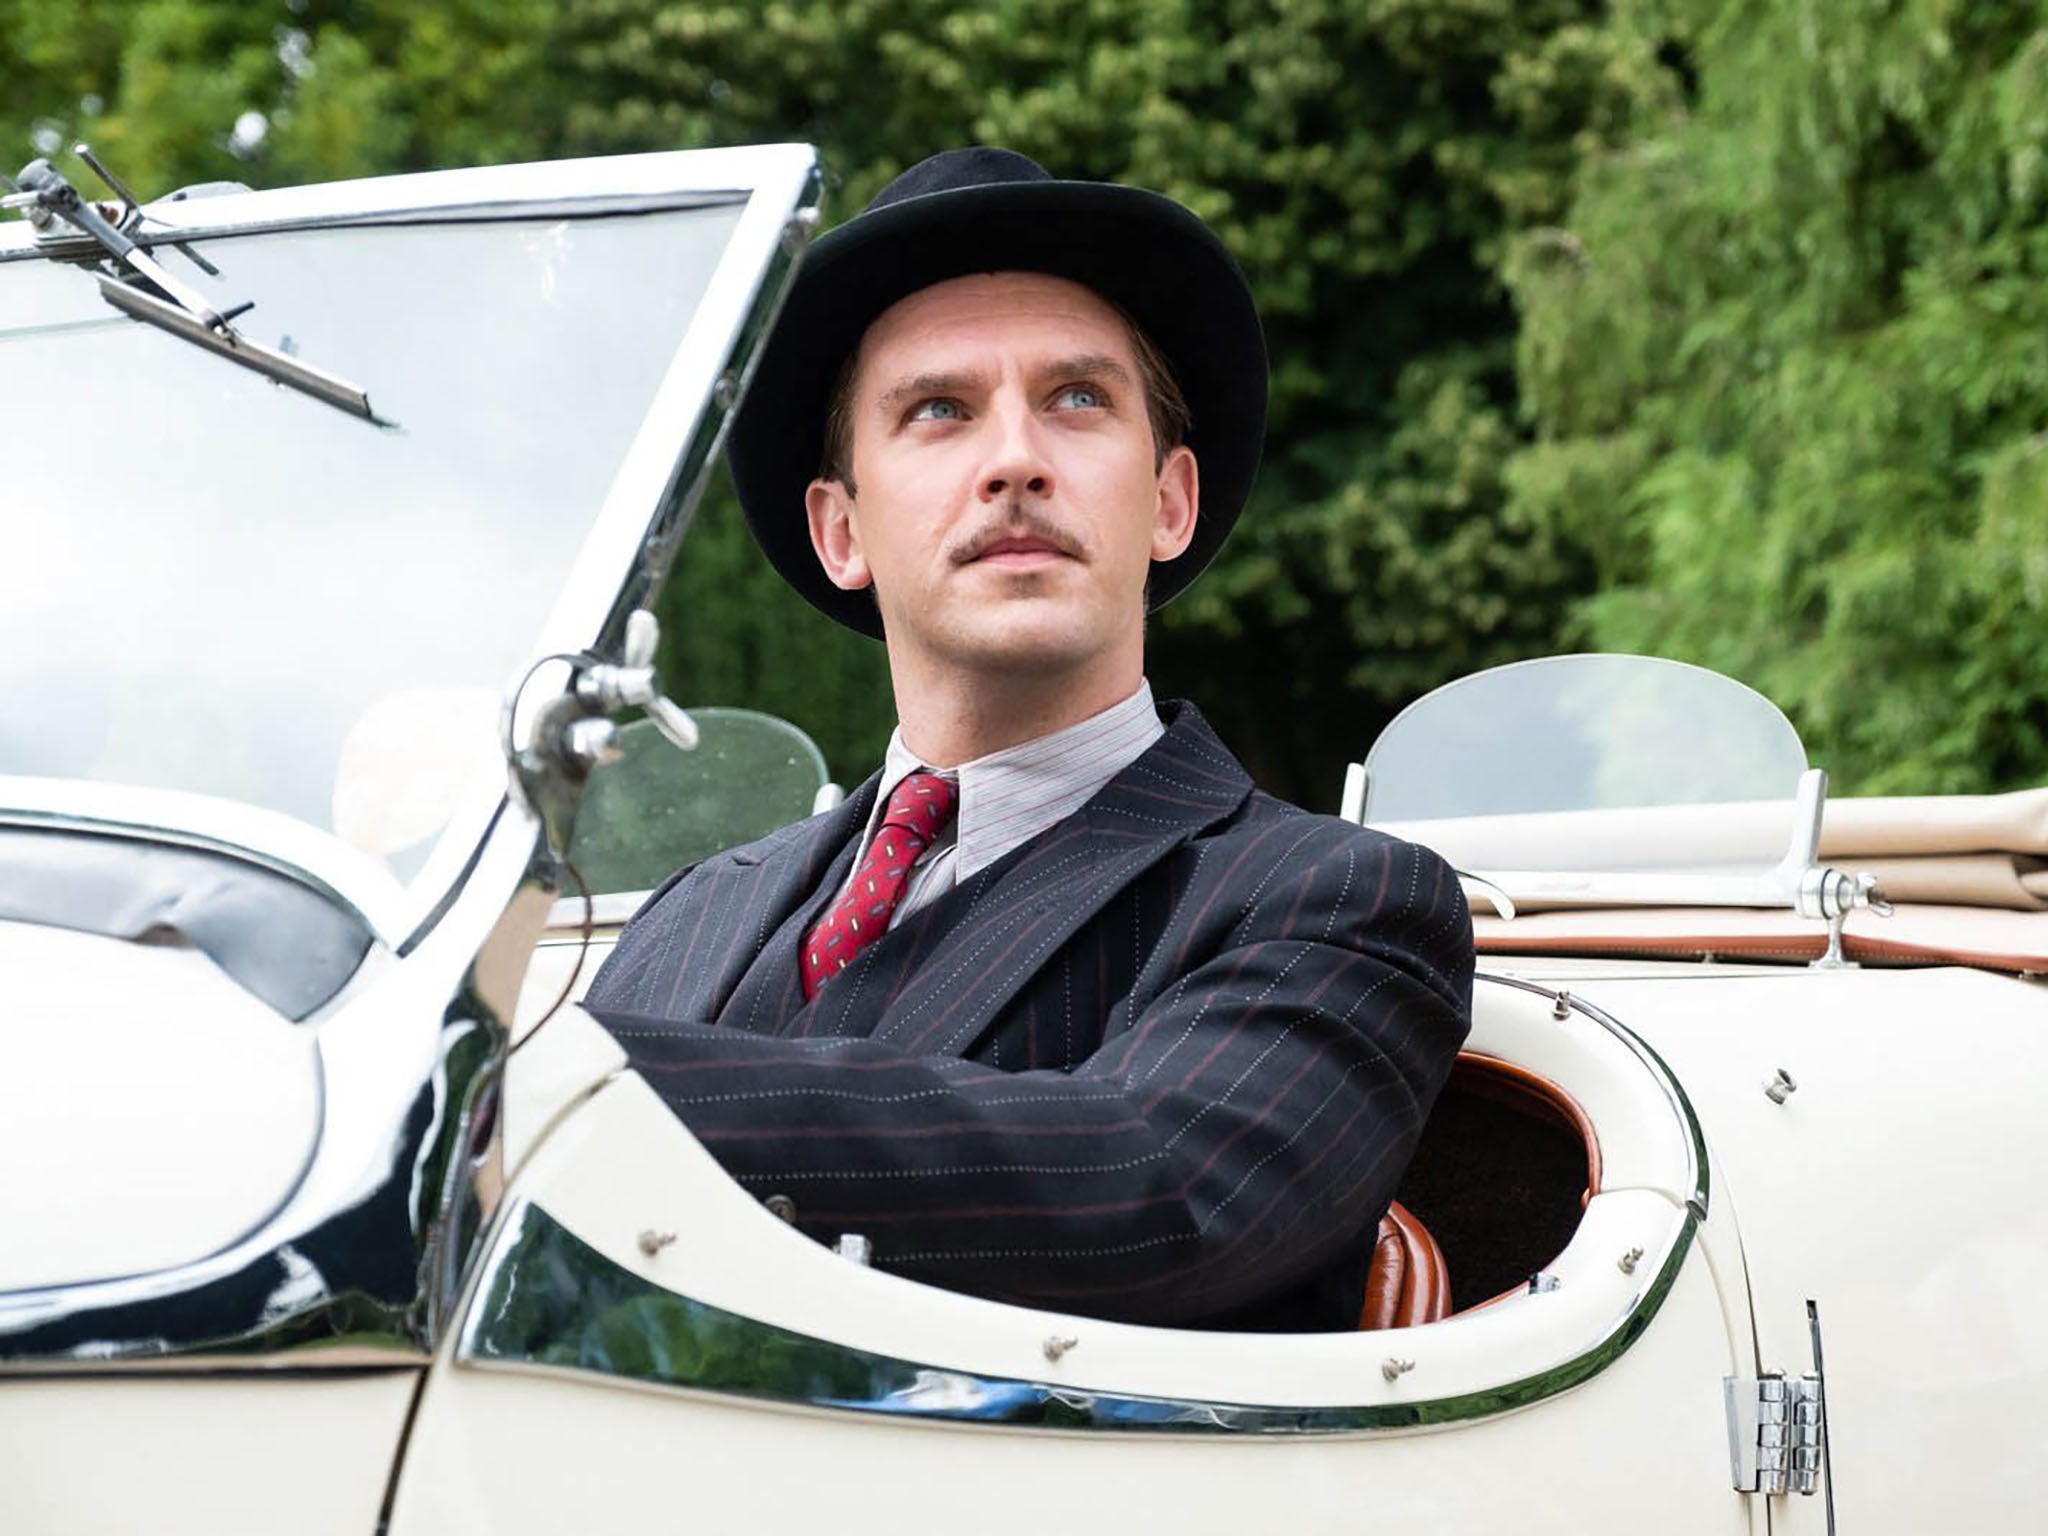 Dan Stevens gets behind the wheel (if not to his death) in the new comedy Blithe Spirit